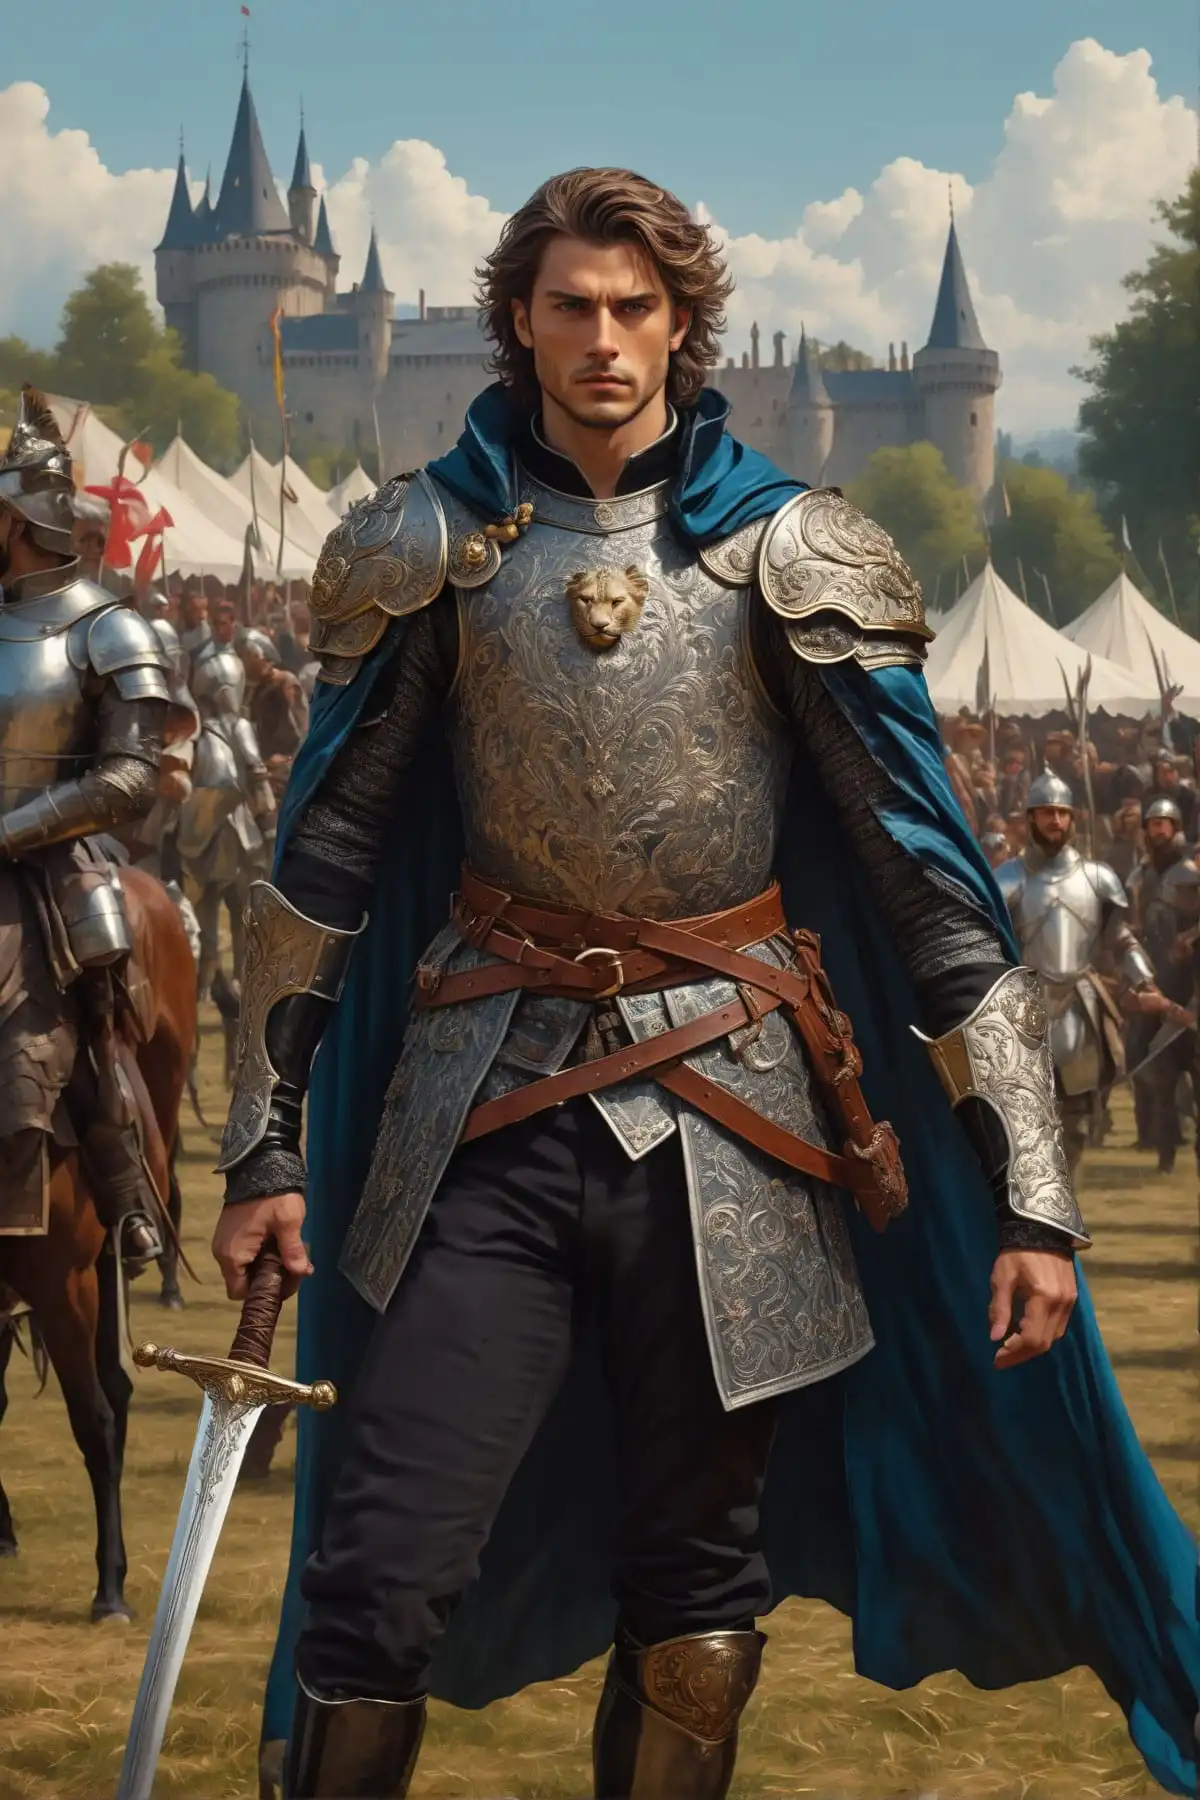 handsome young squire in front of a medeival encampment